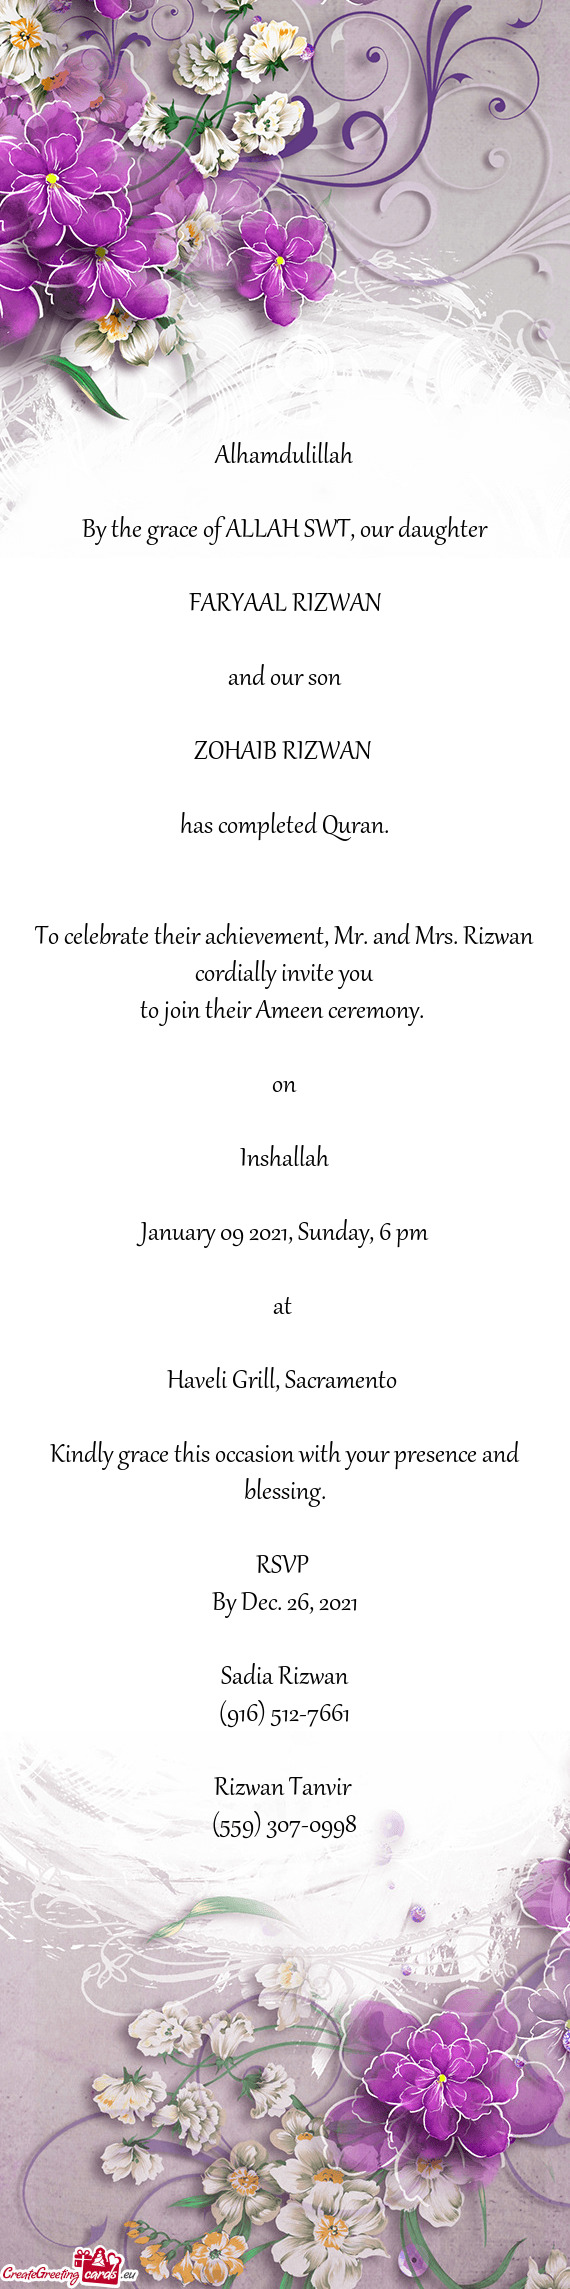 To celebrate their achievement, Mr. and Mrs. Rizwan cordially invite you